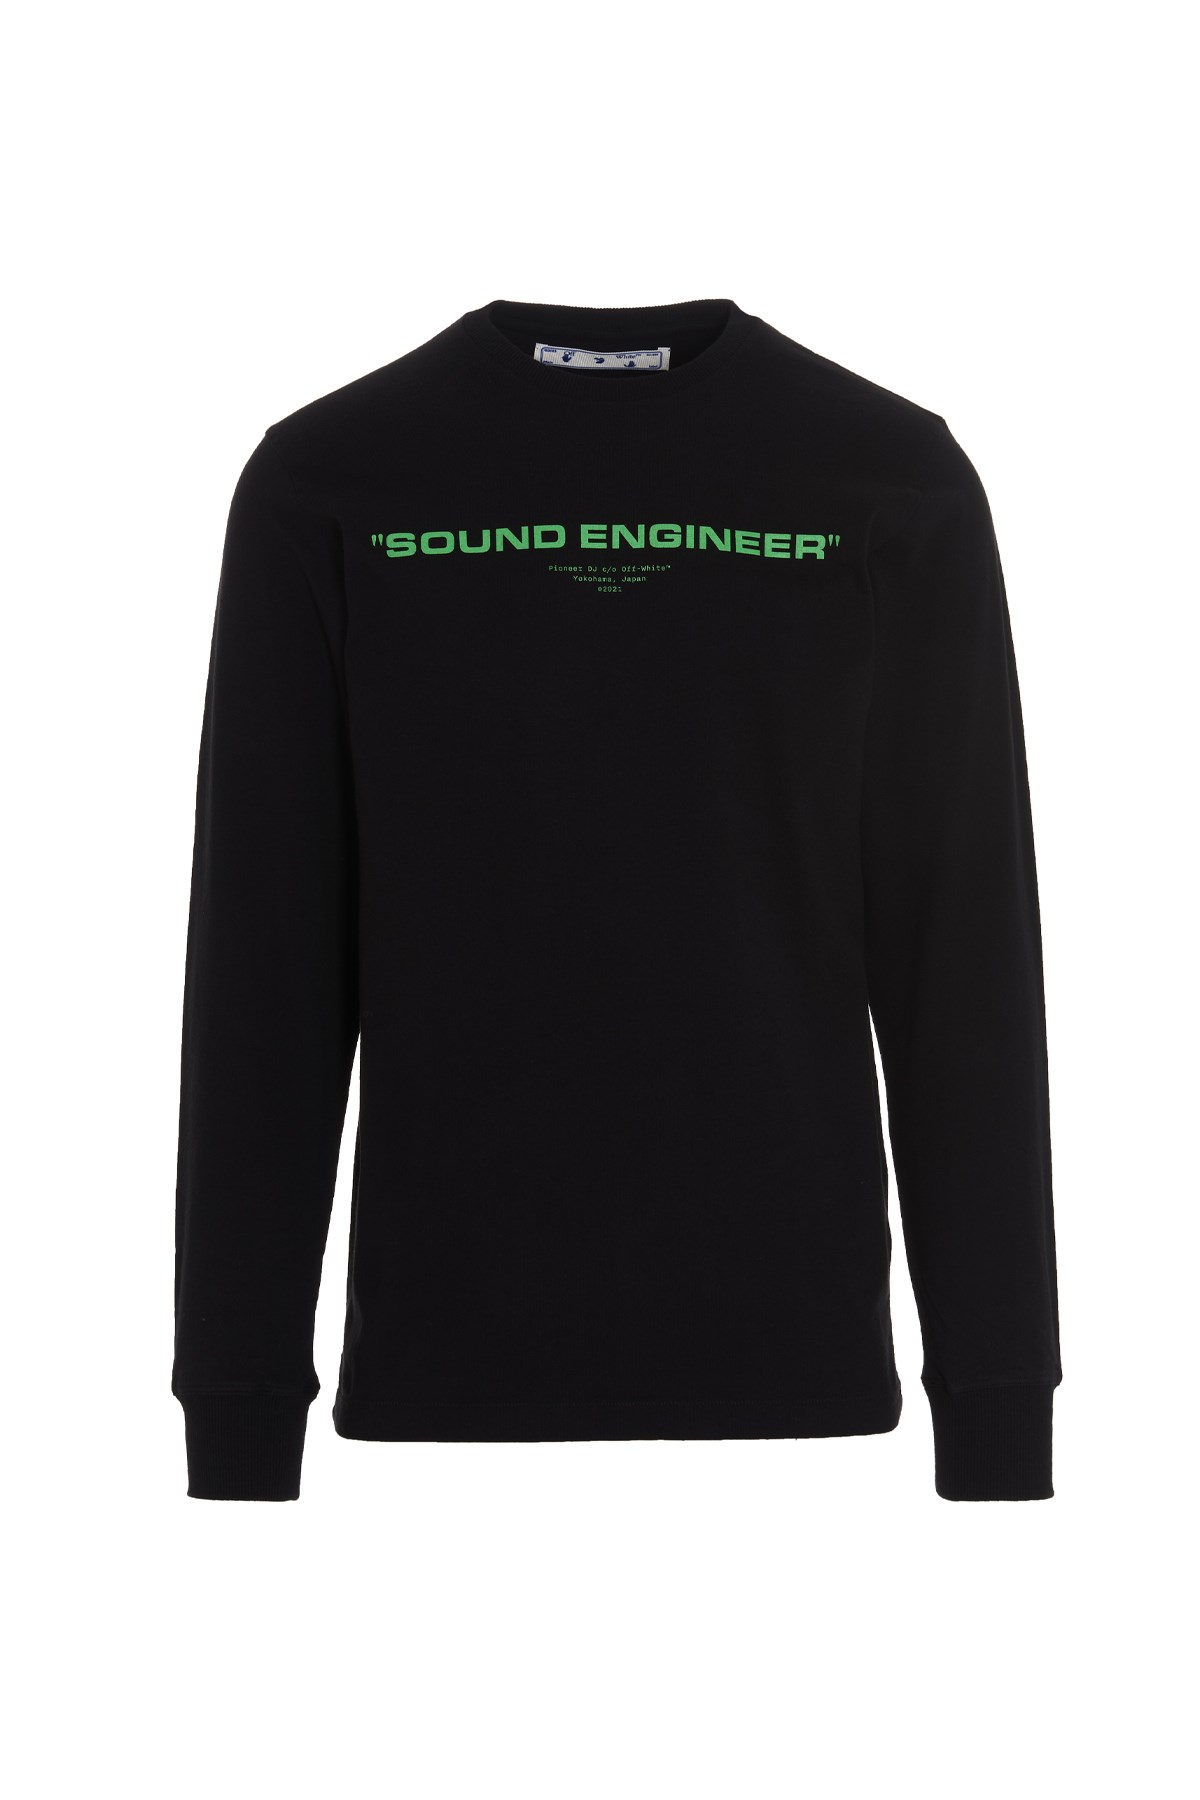 OFF-WHITE  Pioneer Dj C/O Off-White™ 'Console L/S' T-Shirt